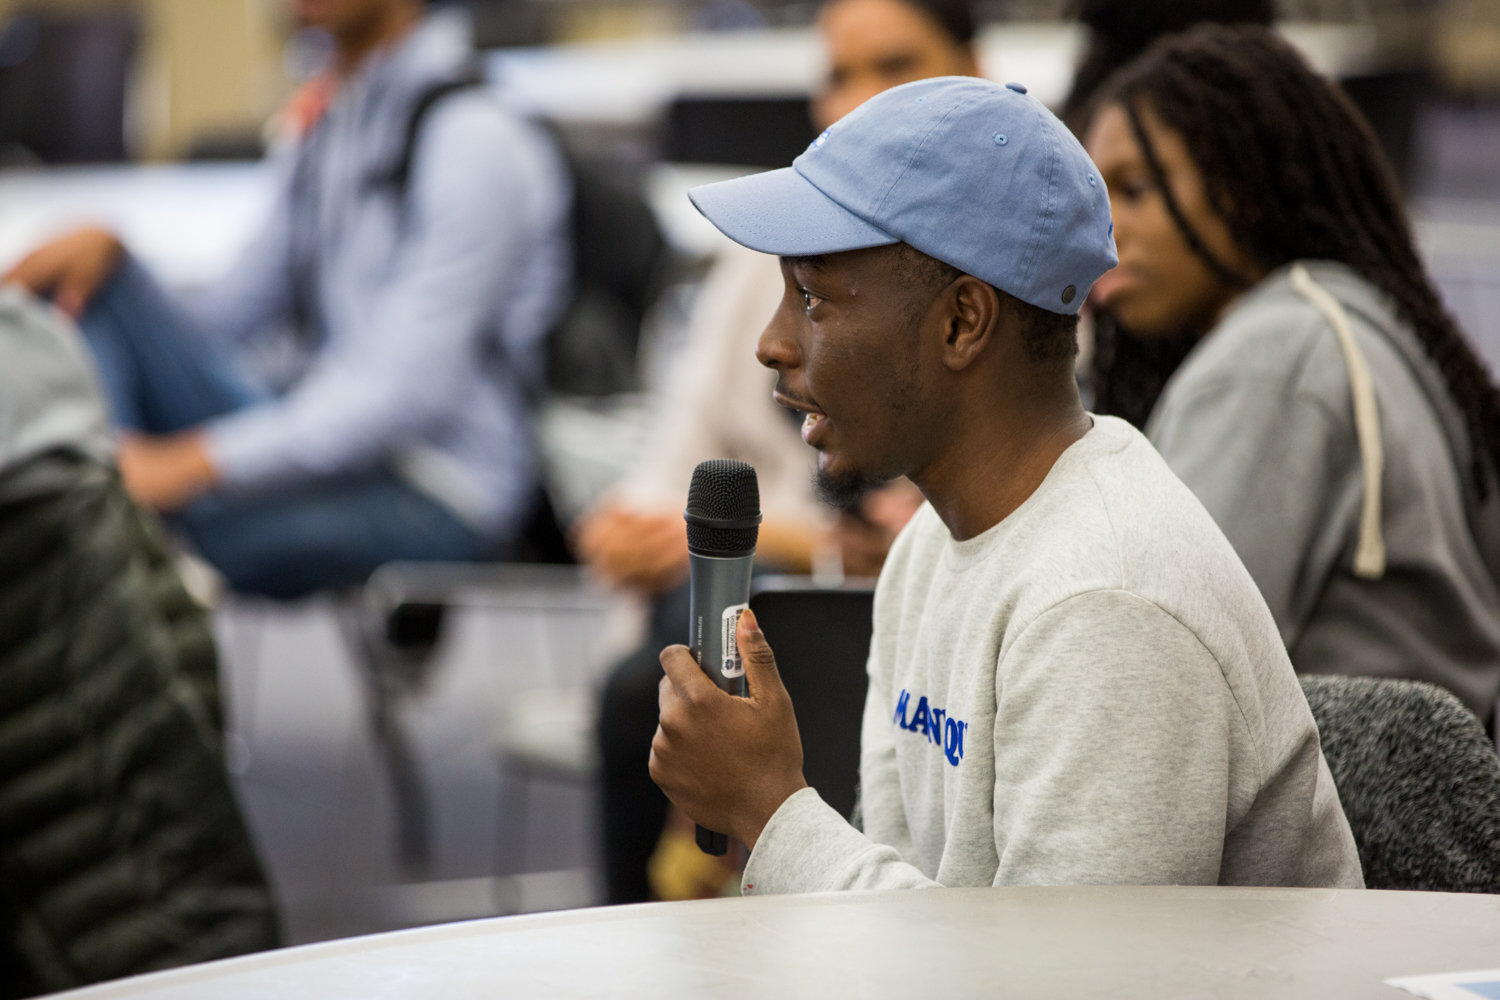 Lehman College student Hussein Abdul talks about mental health issues students deal with during a March 9 forum hosted by CUNY Rising Alliance, which has advocated on behalf of students across the university system.